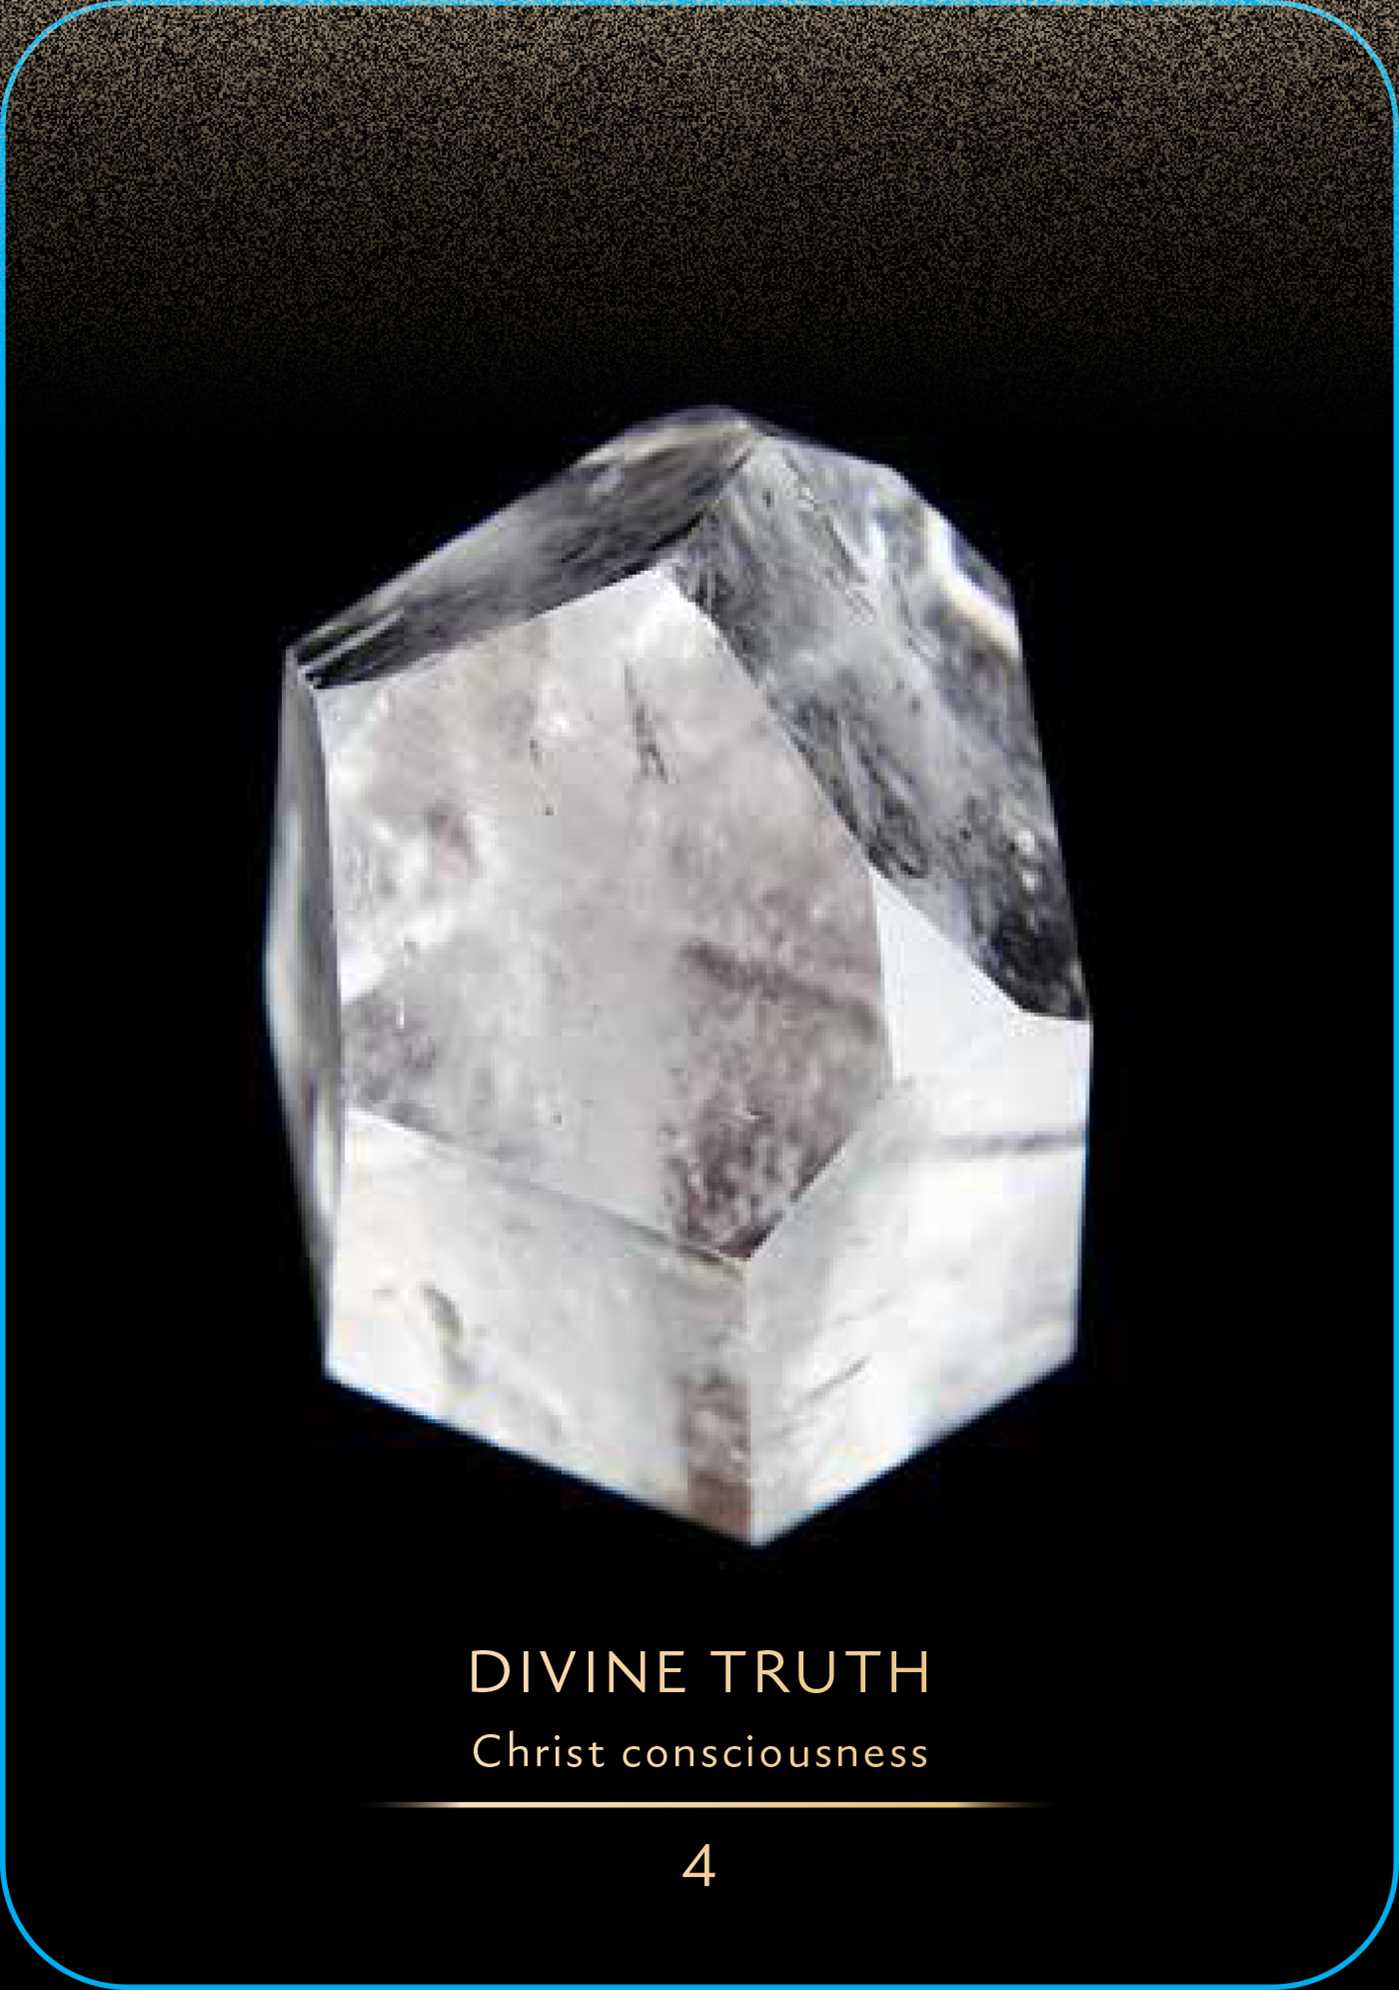 Master Teacher Crystal Oracle - Super Crystals that empower - Heavenly Crystals Online